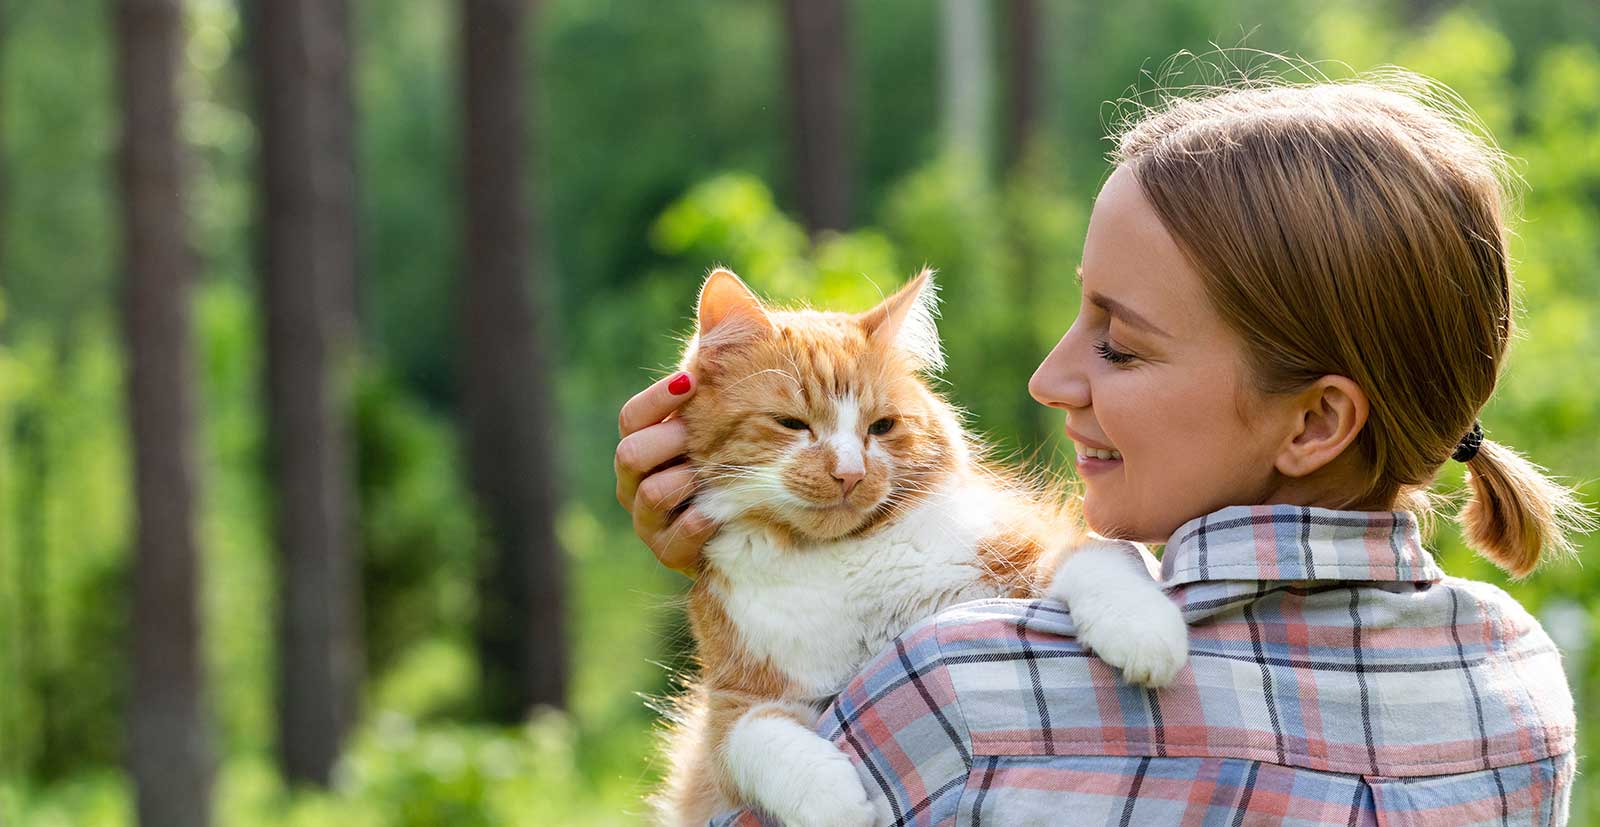 A woman holding a ginger cat outdoors